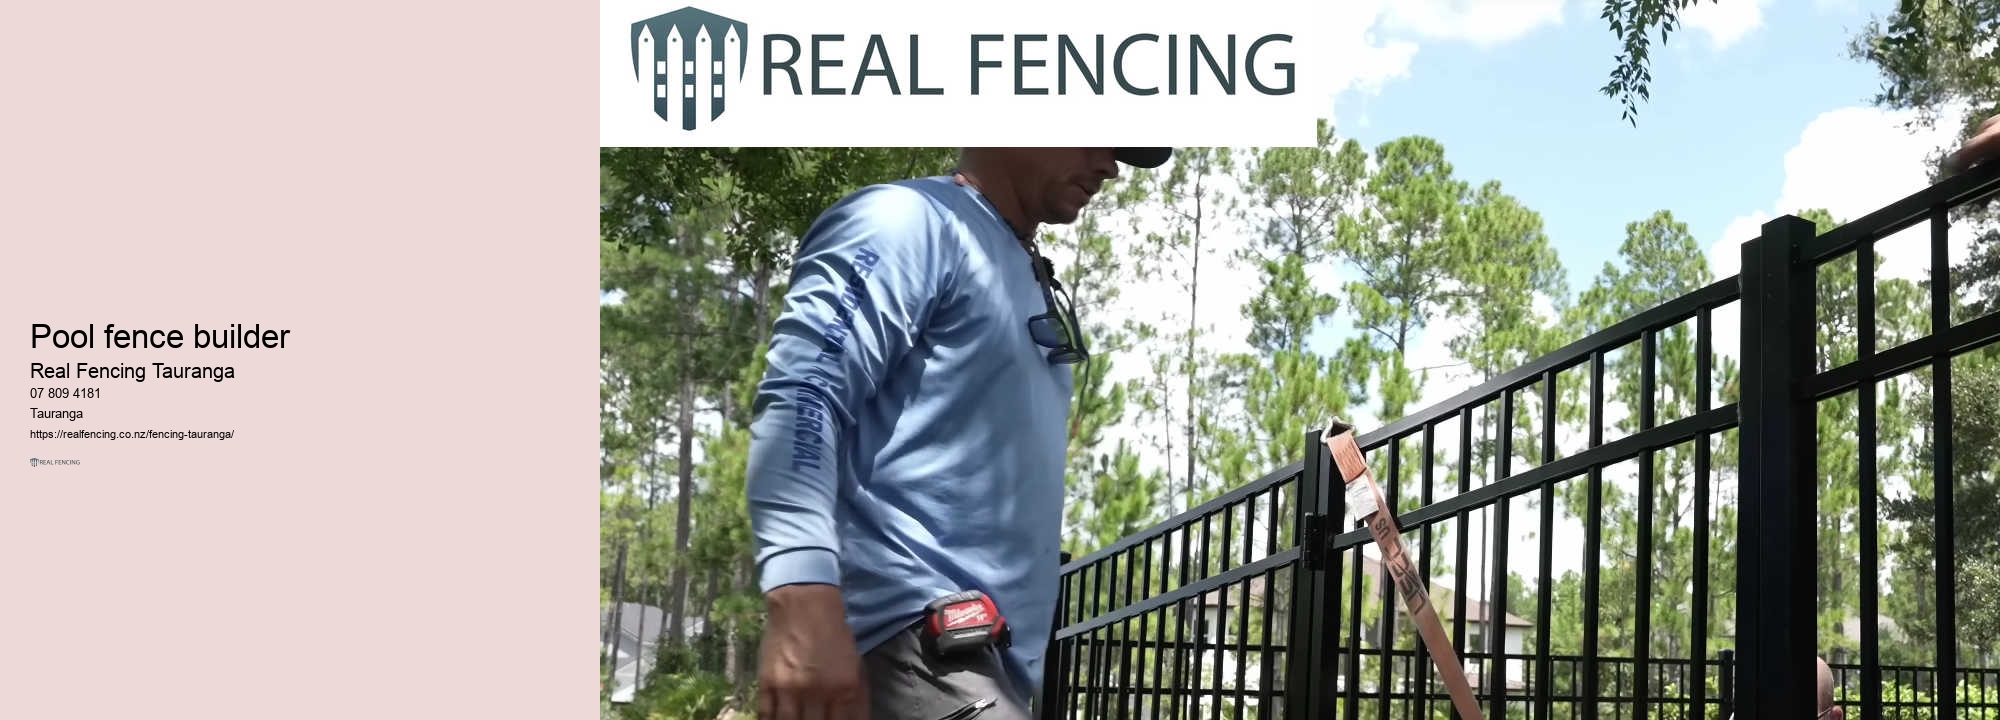 Swimming pool fencing